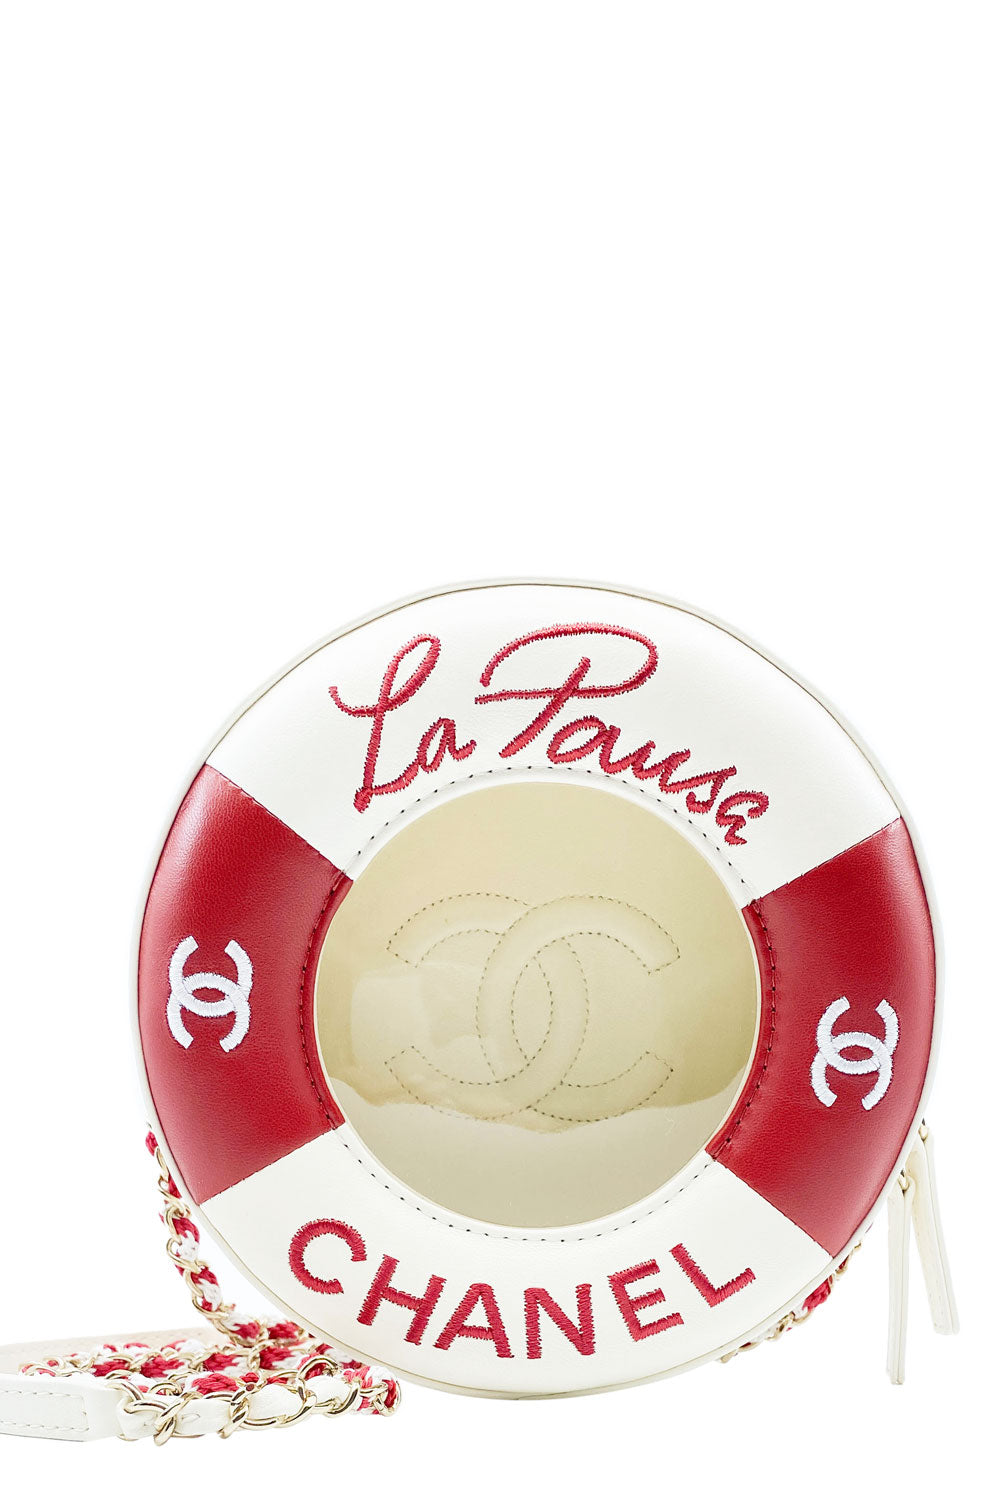 CHANEL Lifesaver Coco Round Bag Frontansicht